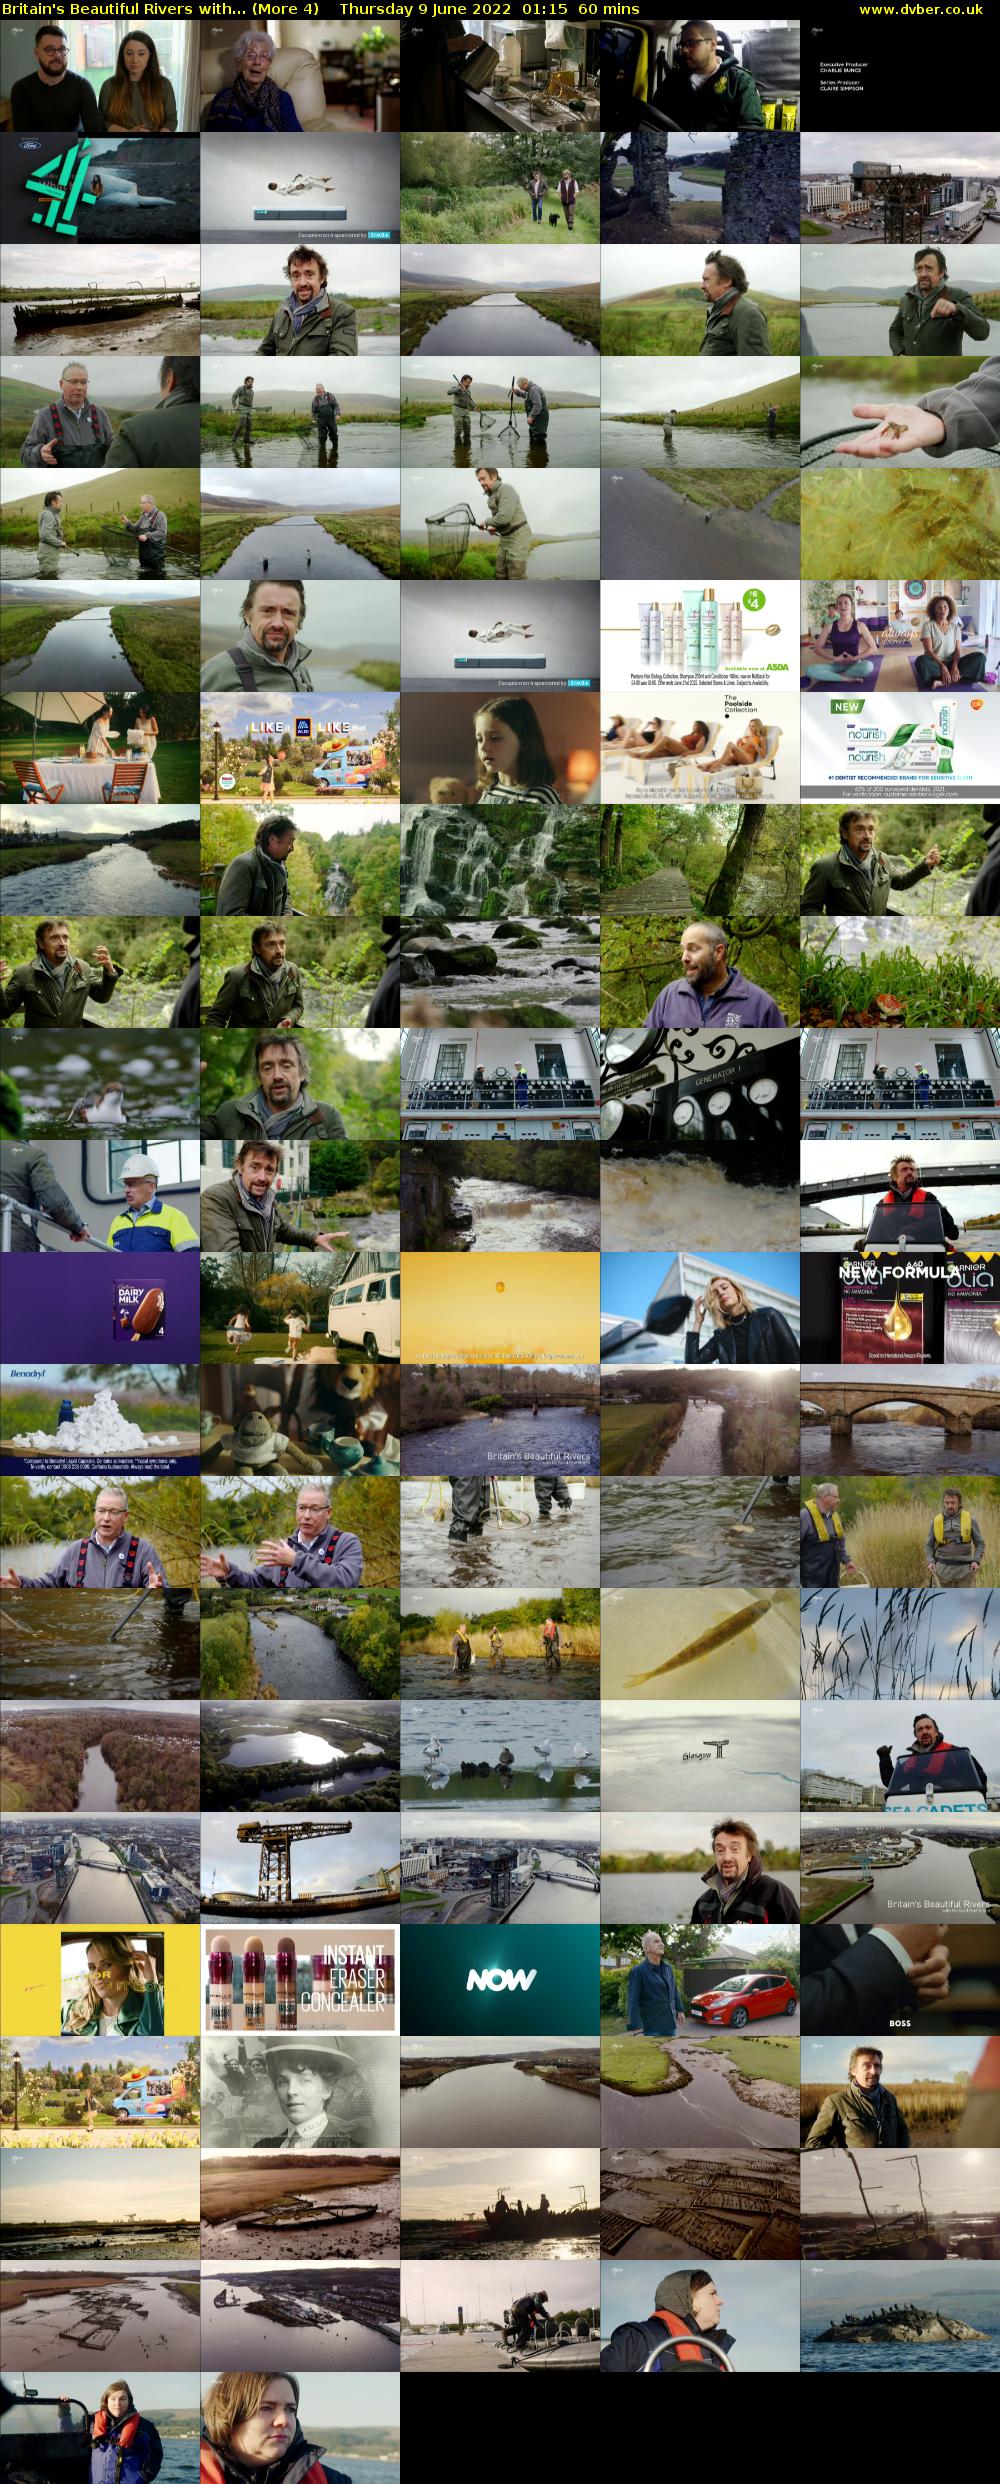 Britain's Beautiful Rivers with... (More 4) Thursday 9 June 2022 01:15 - 02:15